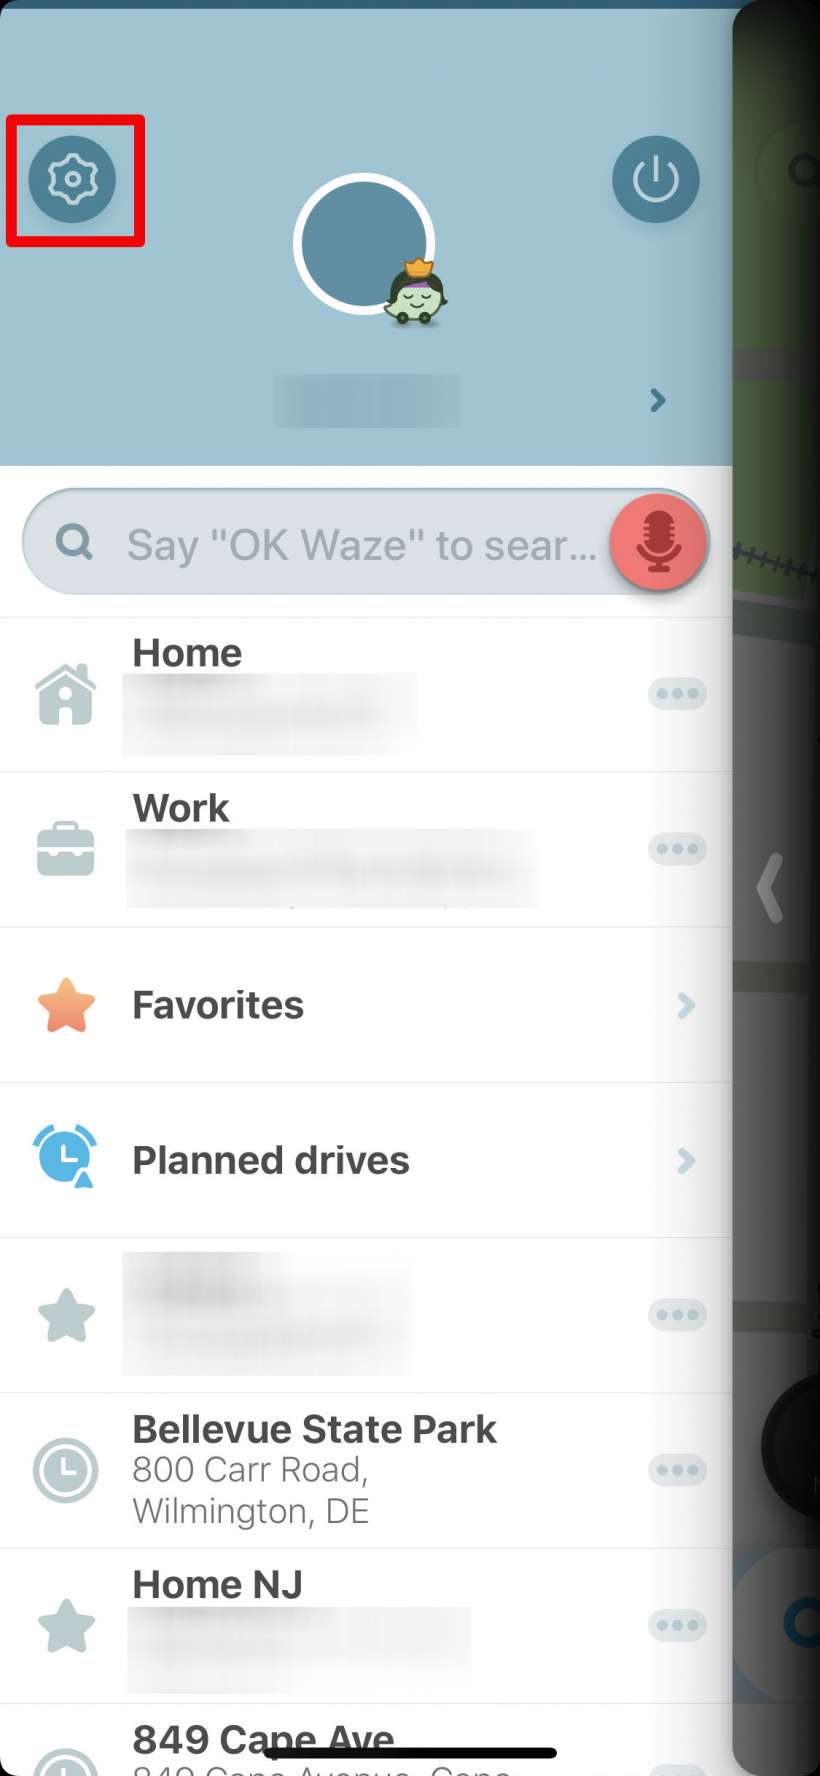 How to change your car icon on Google Maps and Waze on iPhone.